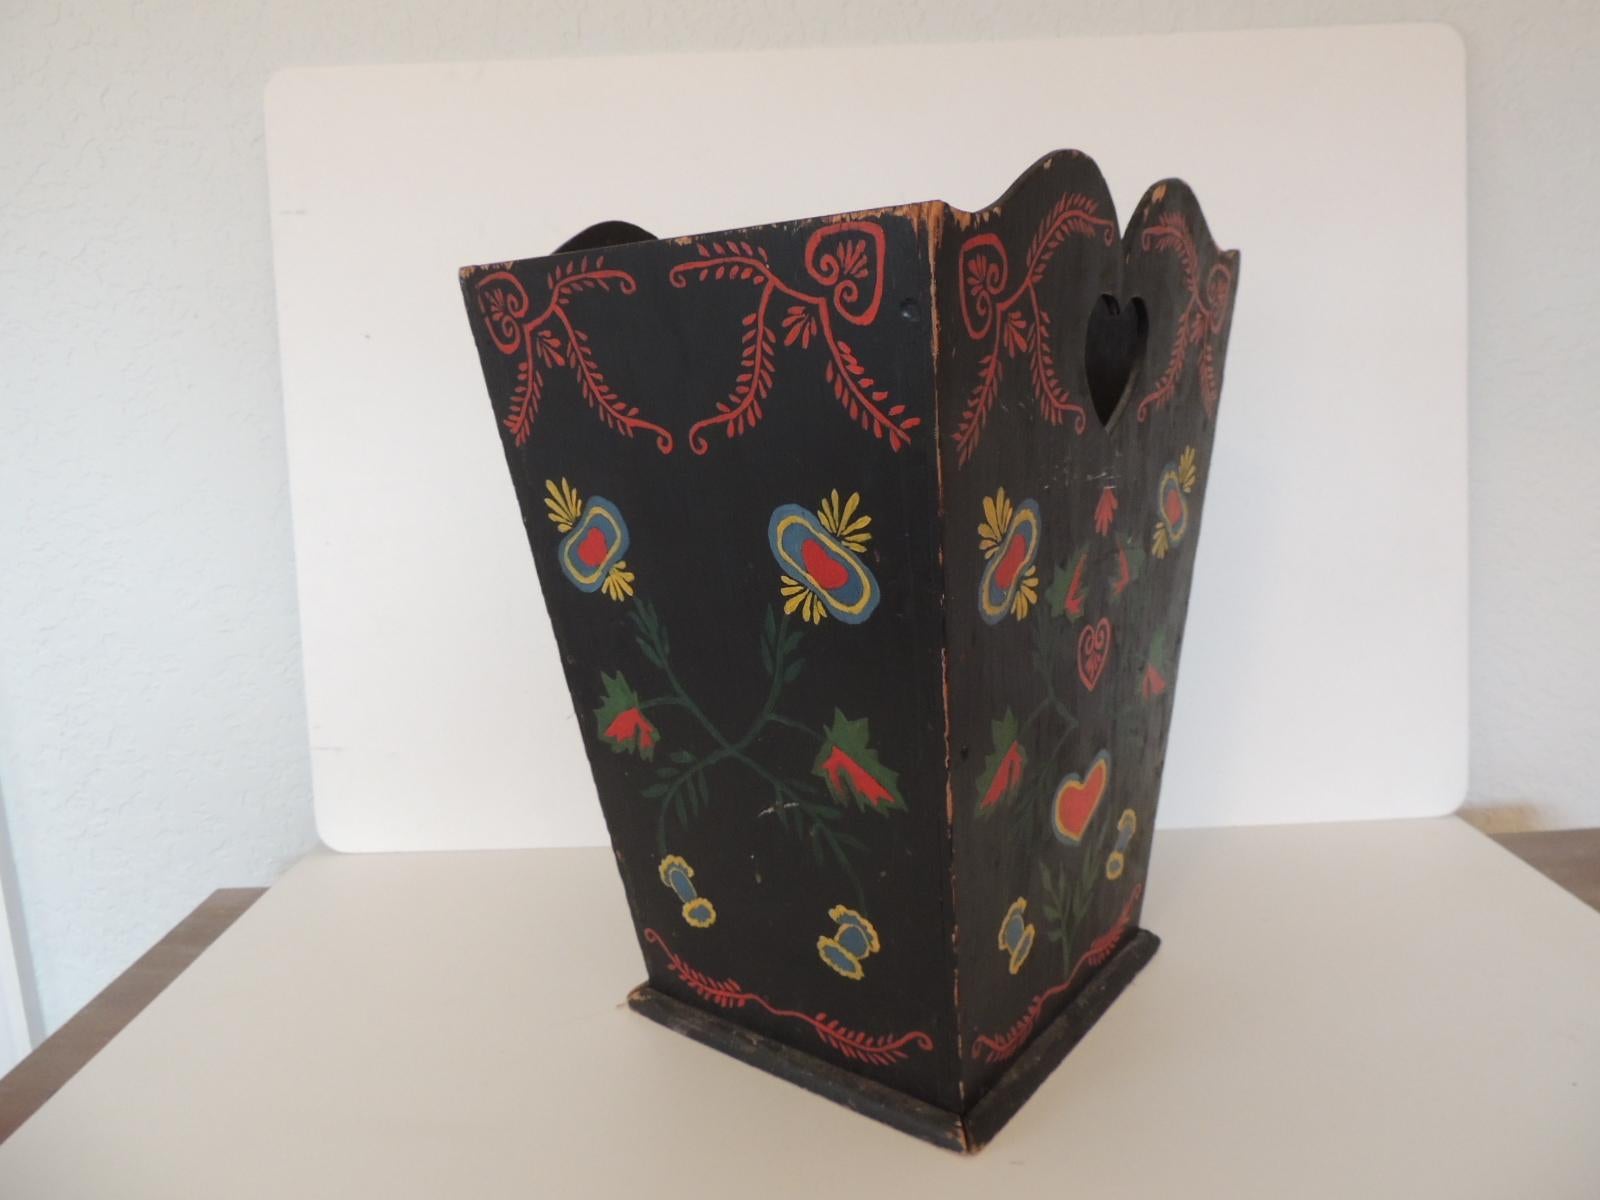 Vintage Folk Art style Wastebasket or umbrella stand.
Primitive painted bin with heart motif cutout handles.  Artisanal piece.
Hand painted on all four sides in shades of red, green, yellow and black.
Nice patina and floral pattern,
Size: 11' D x